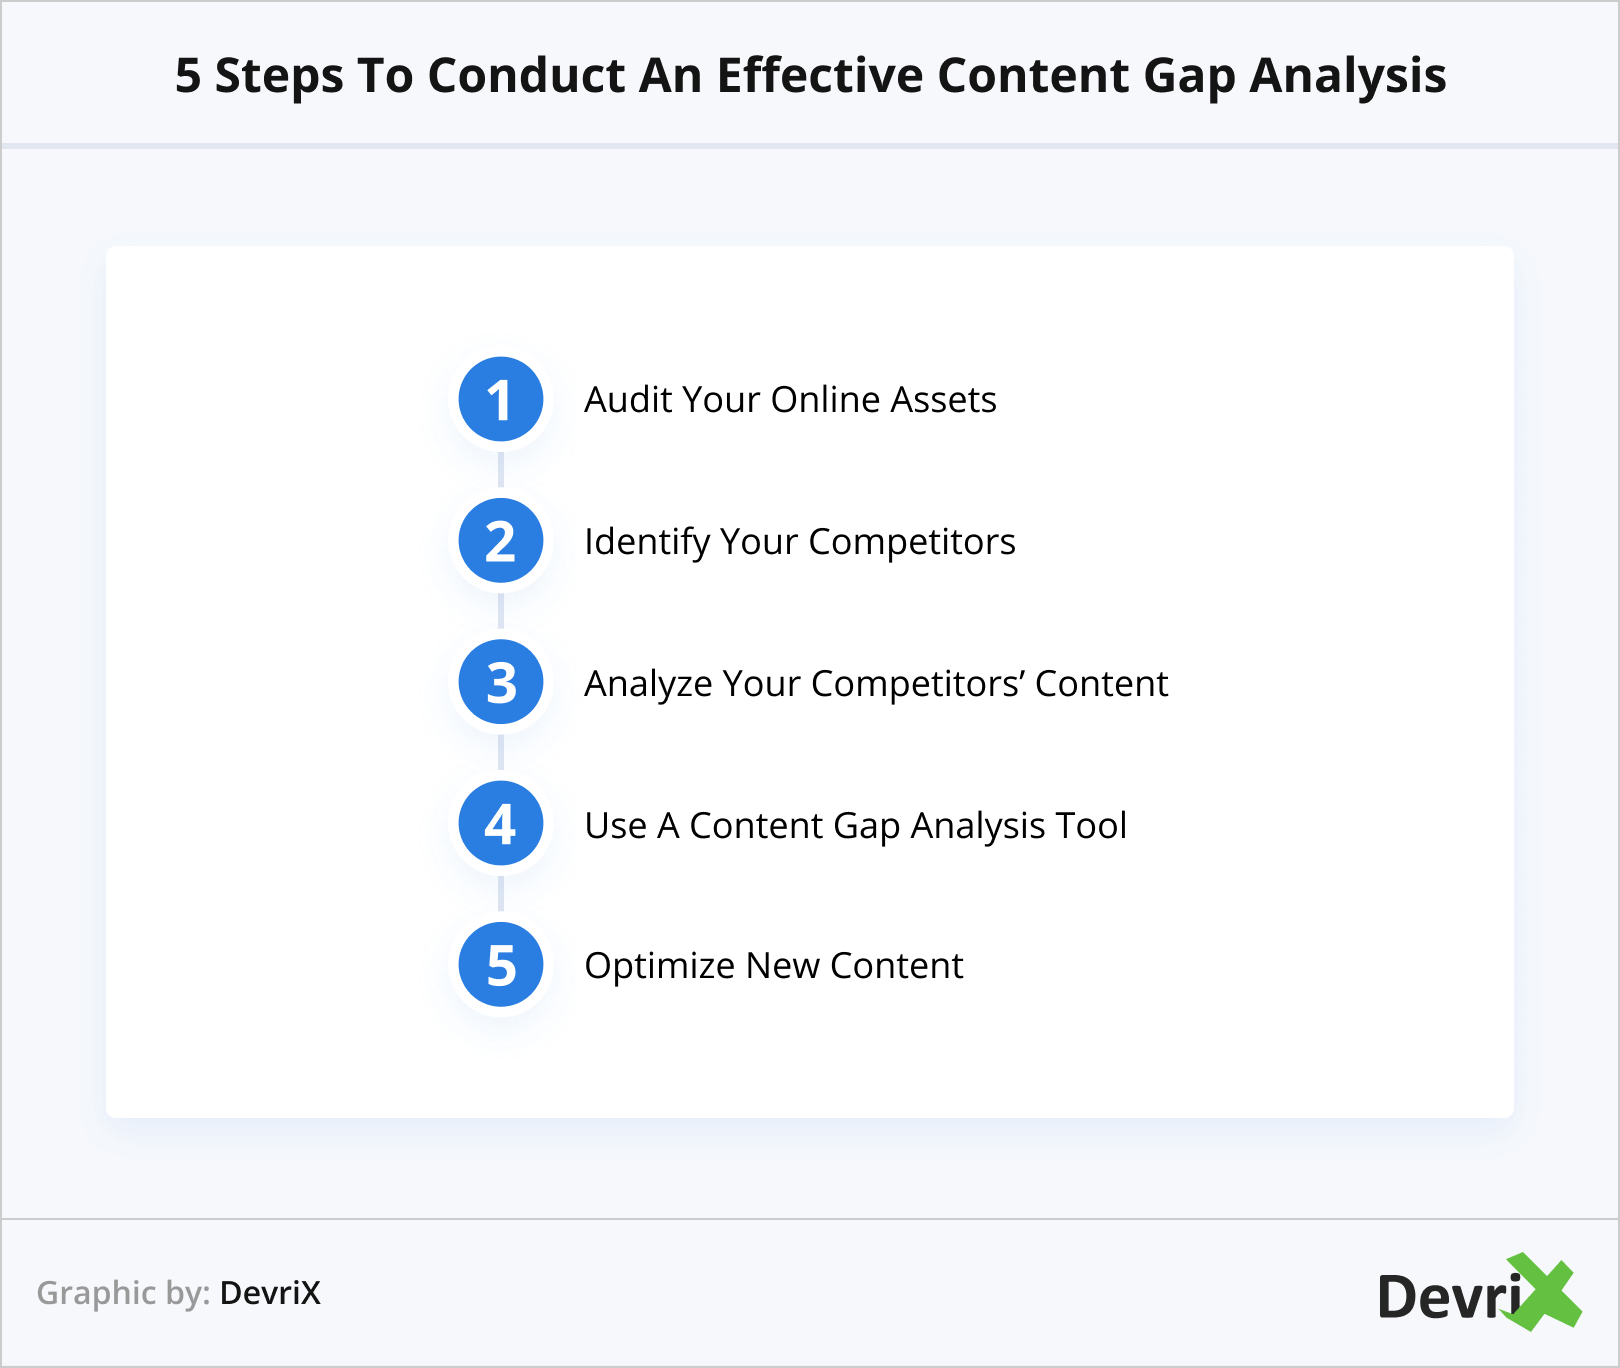 5 Steps To Conduct An Effective Content Gap Analysis